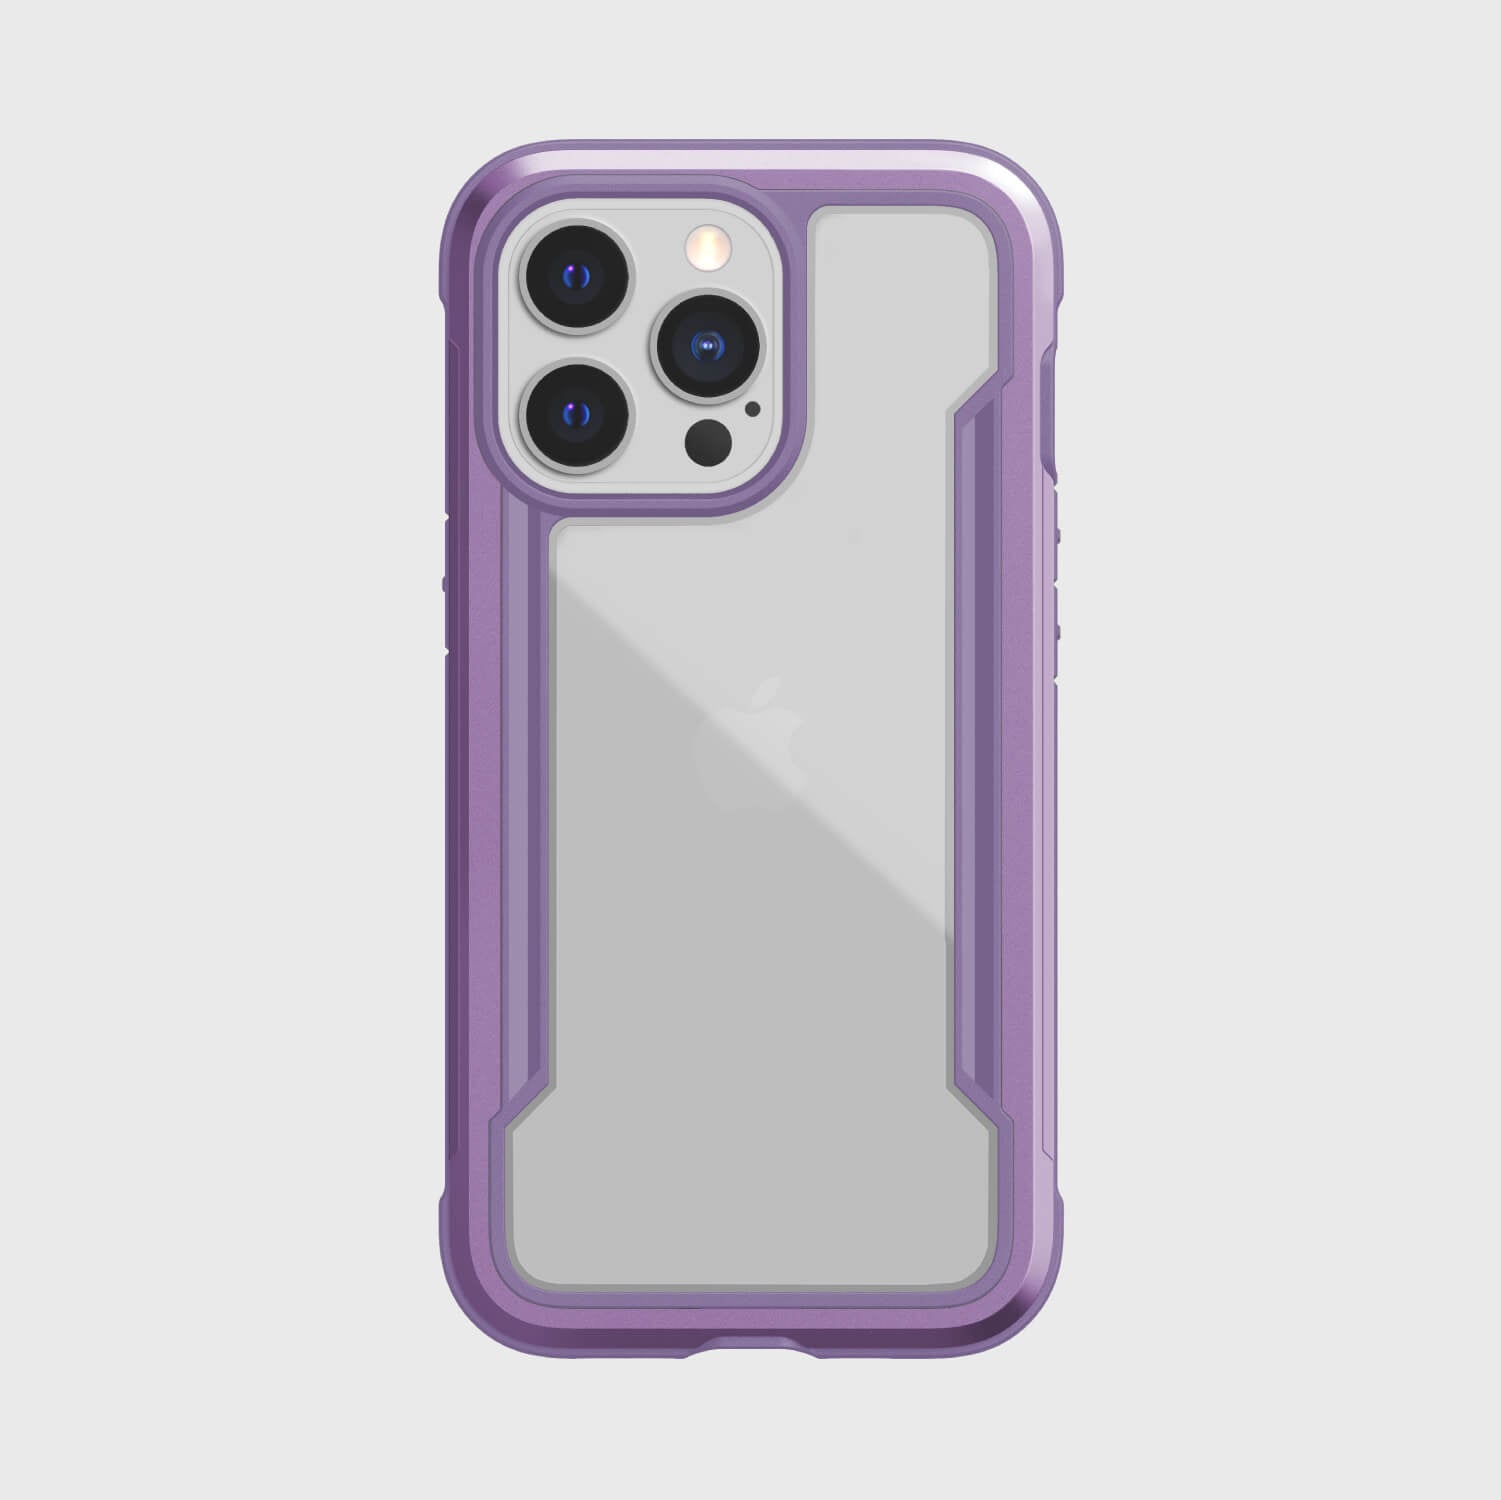 The iPhone 13 Pro Case - SHIELD PRO in a stylish purple color offers drop protection for the back of an iPhone 11 Pro.